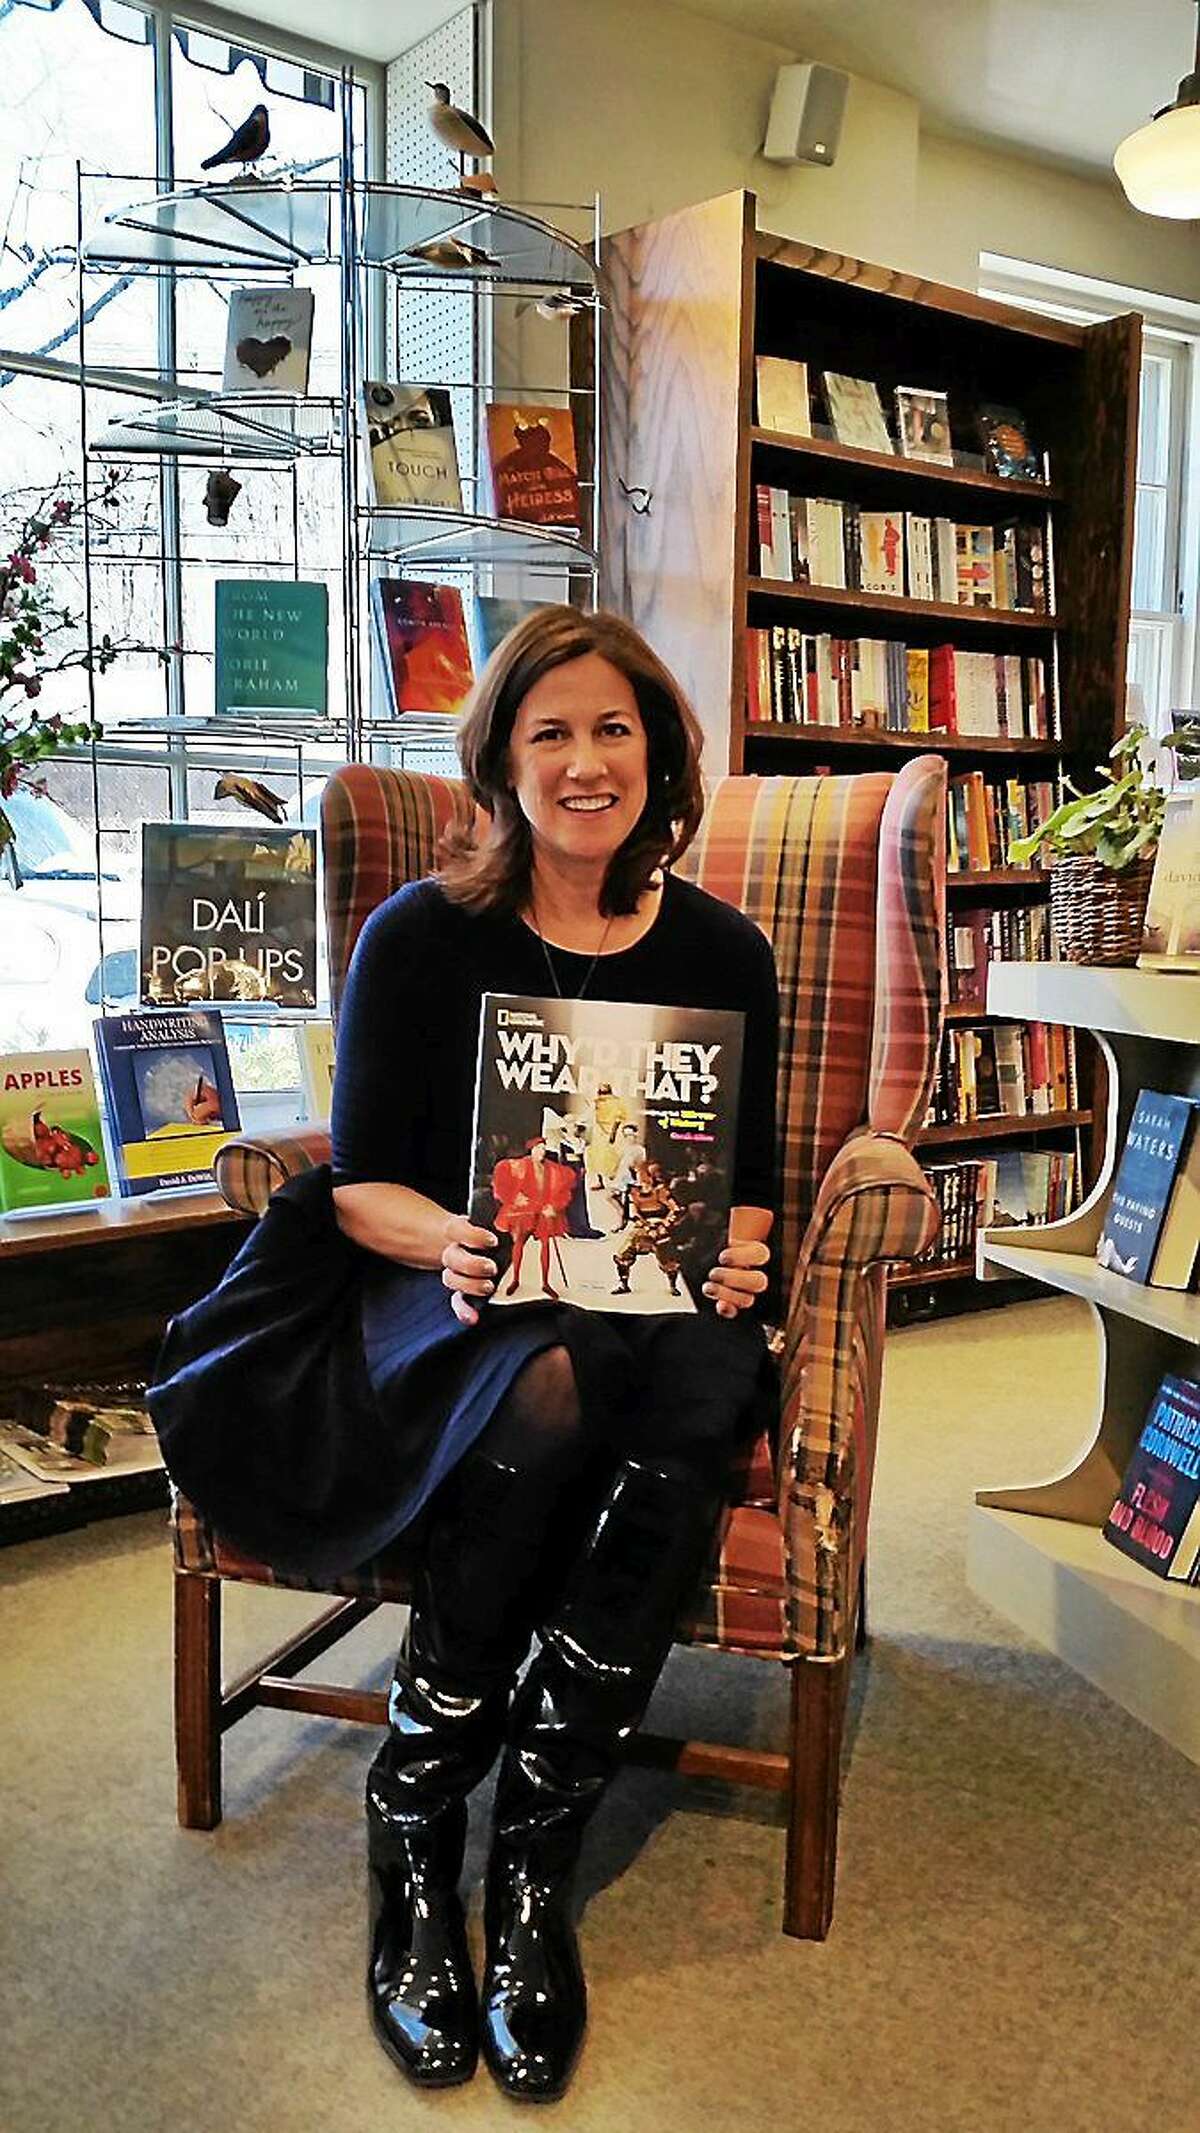 Watertown author Sarah Albee stopped at The Hickory Stick Bookshop in Washington Depot on Sunday to promote her new book.